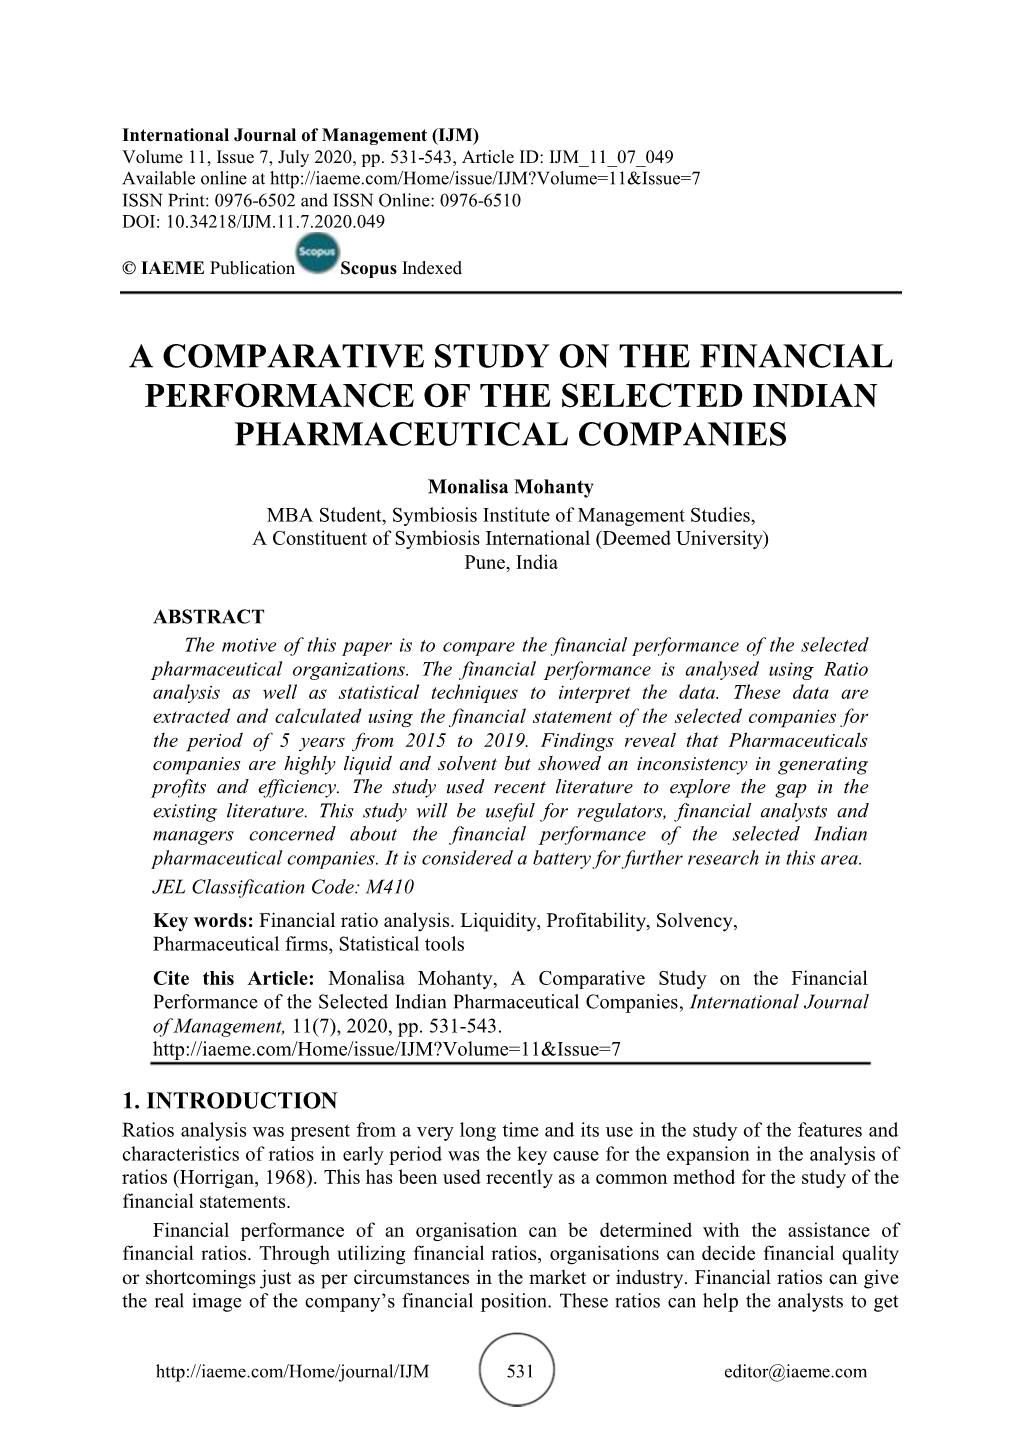 A Comparative Study on the Financial Performance of the Selected Indian Pharmaceutical Companies